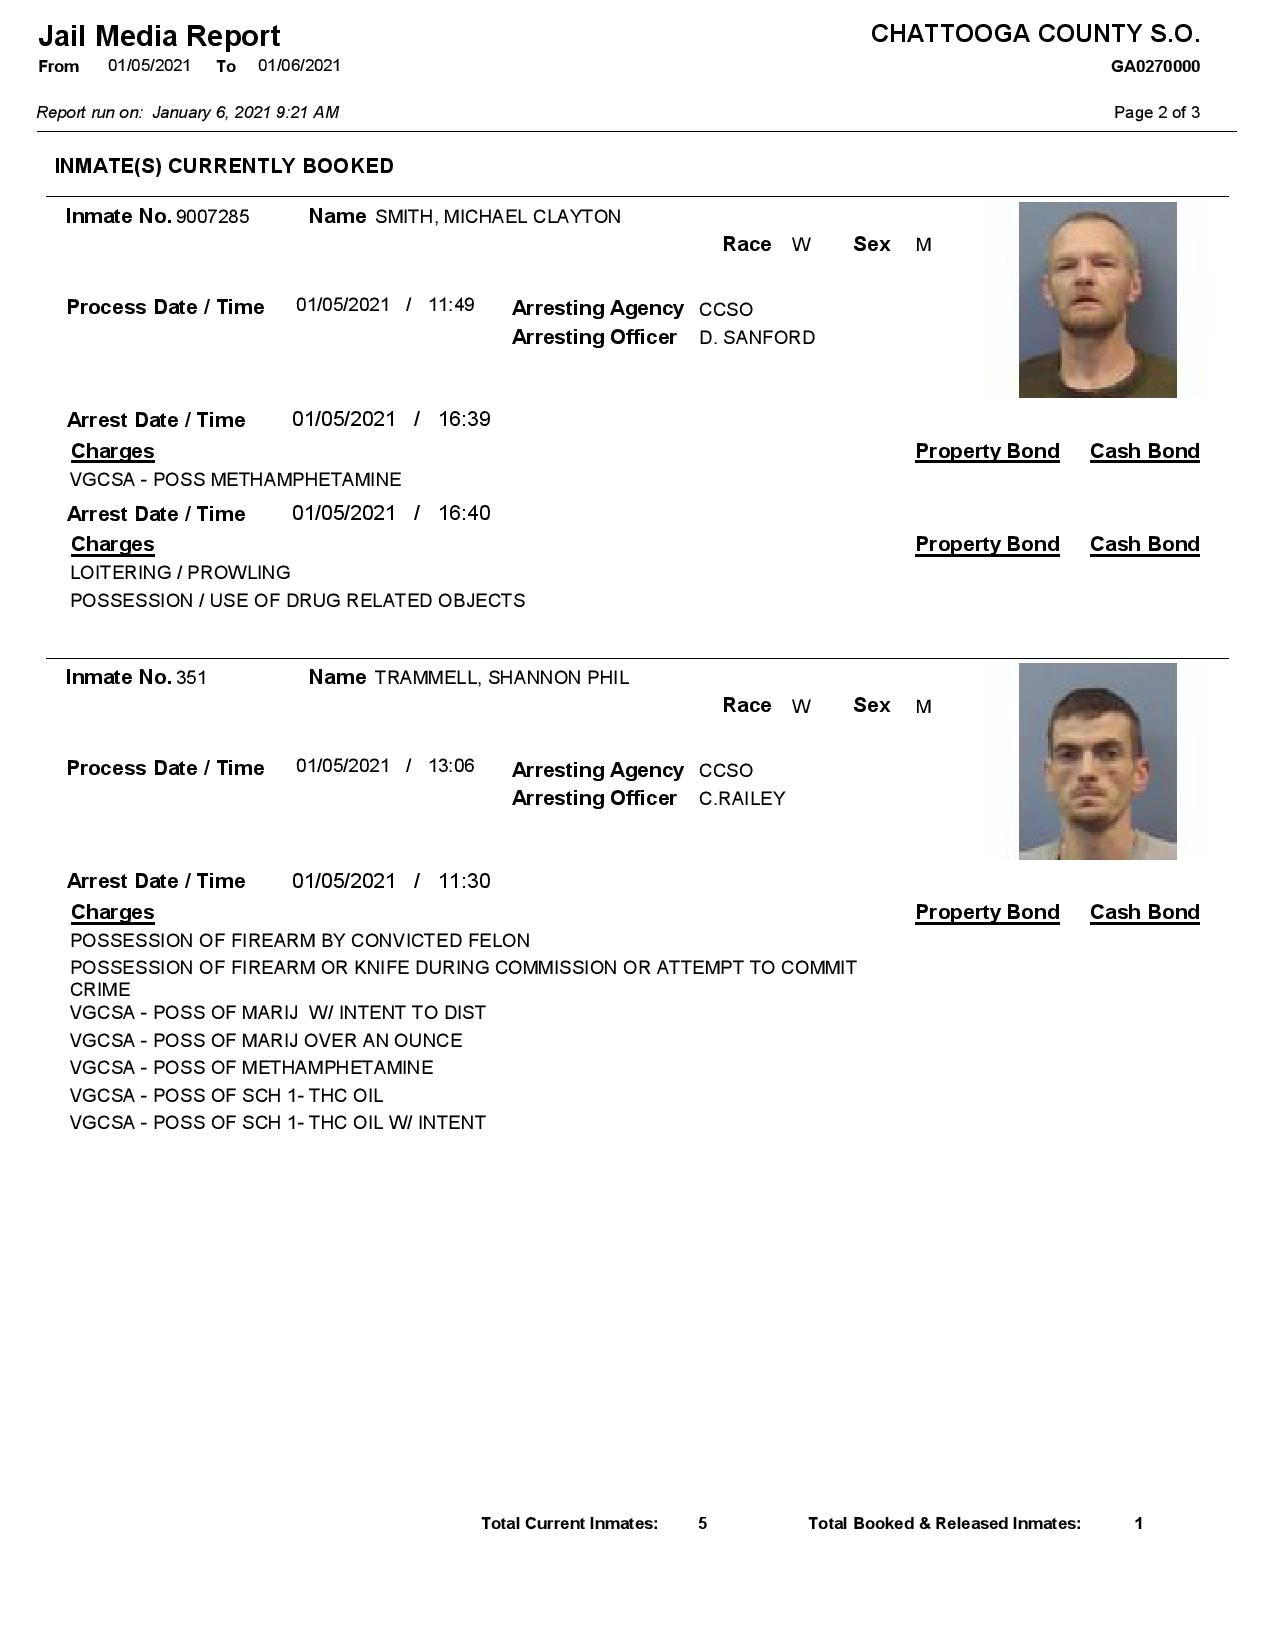 chattooga jail 01.06.21-page-002